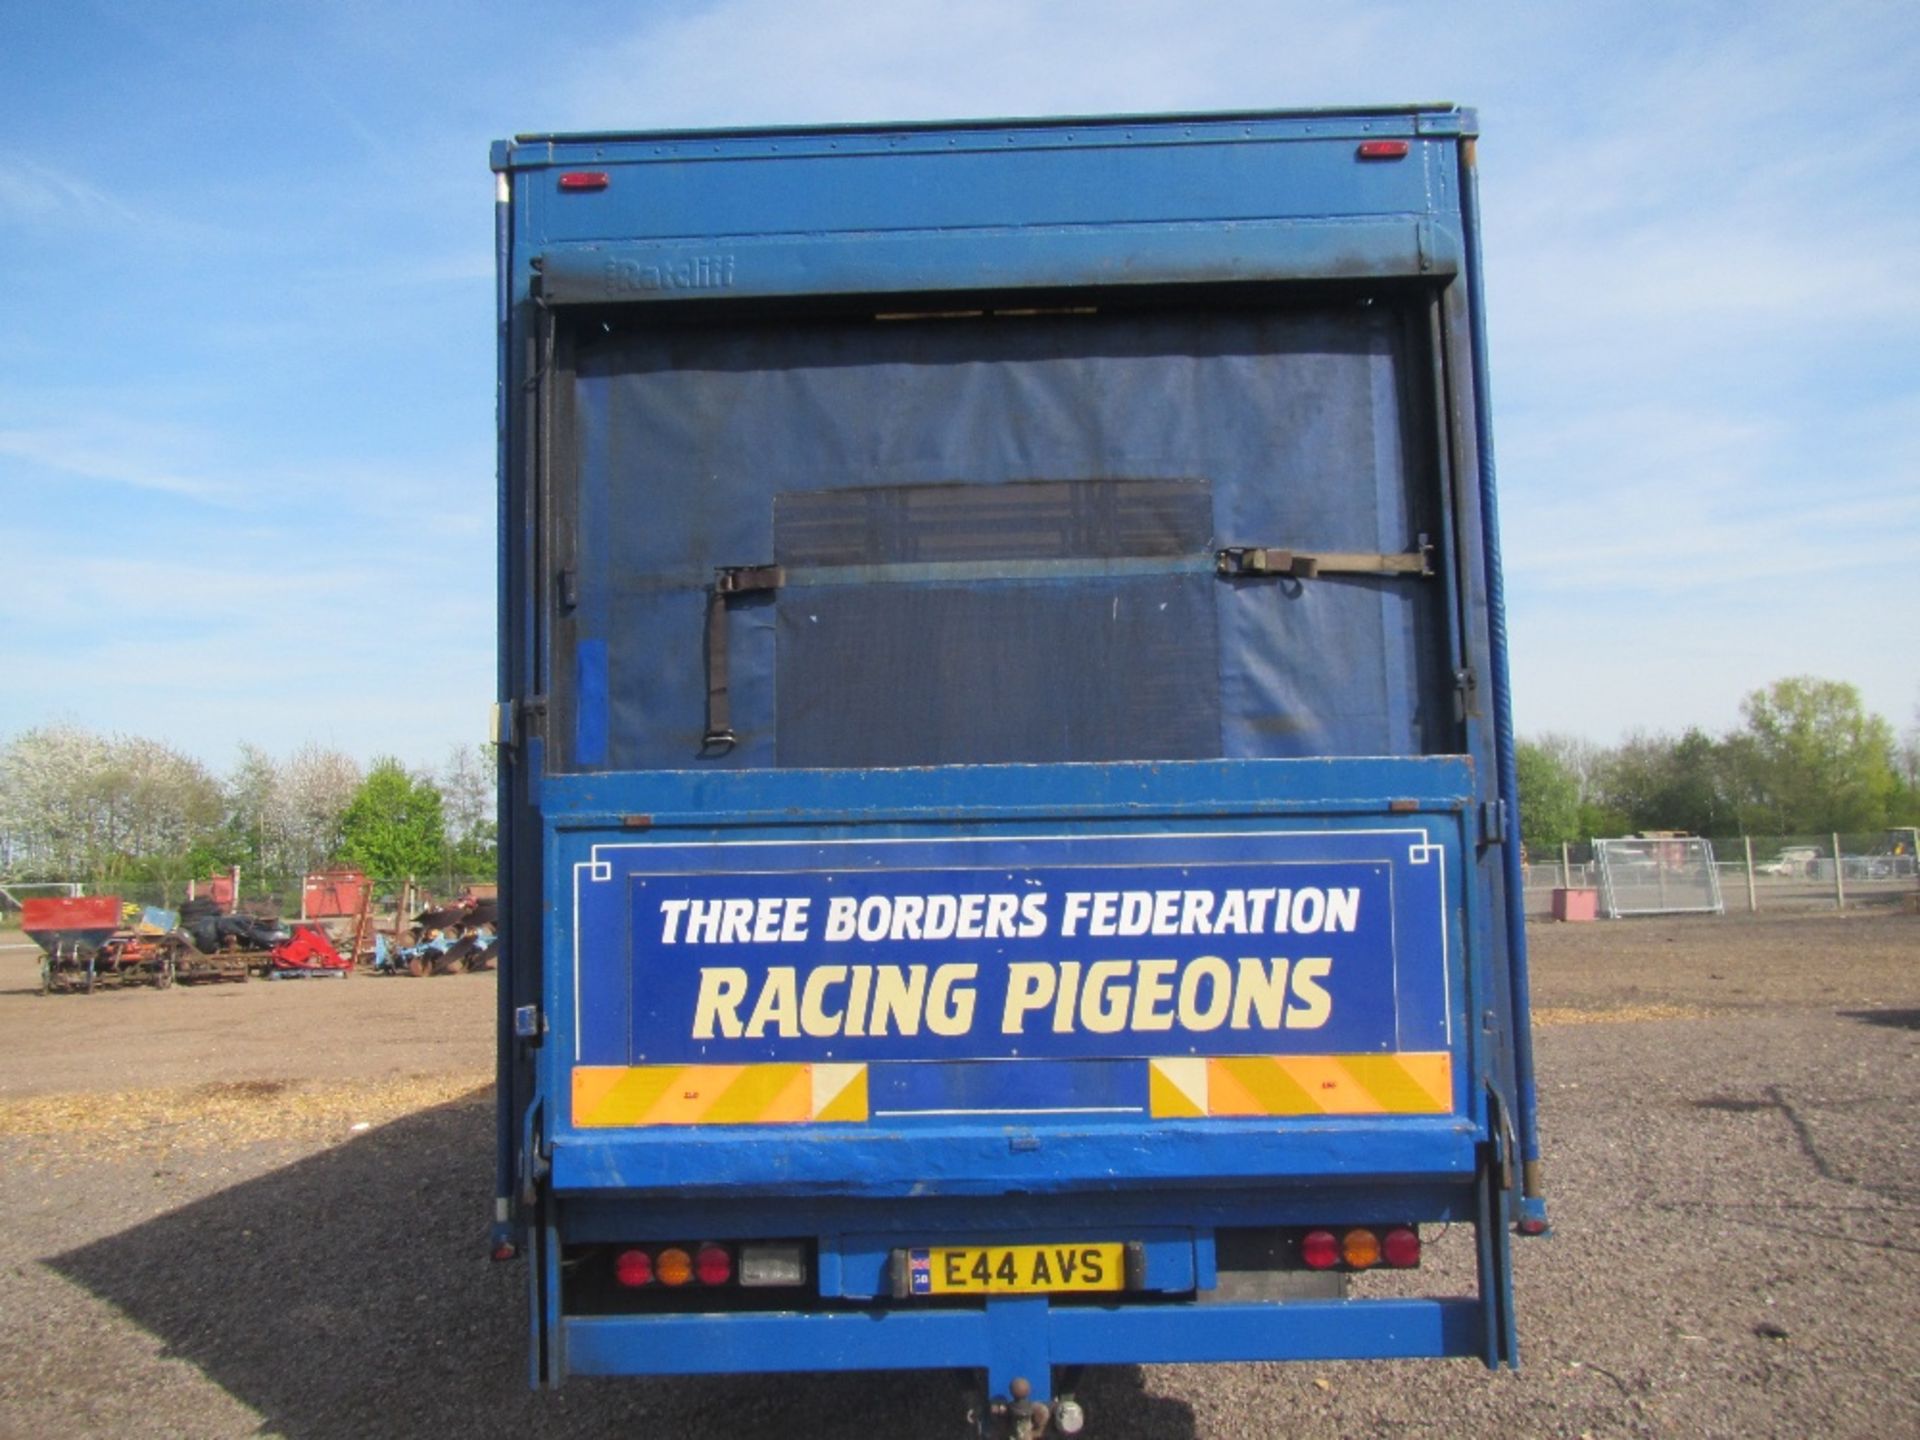 Leyland Curtainsider Lorry with Tail Lift. V5 will be supplied Mileage: 239,042km Reg. No. E44 AVS - Image 4 of 5